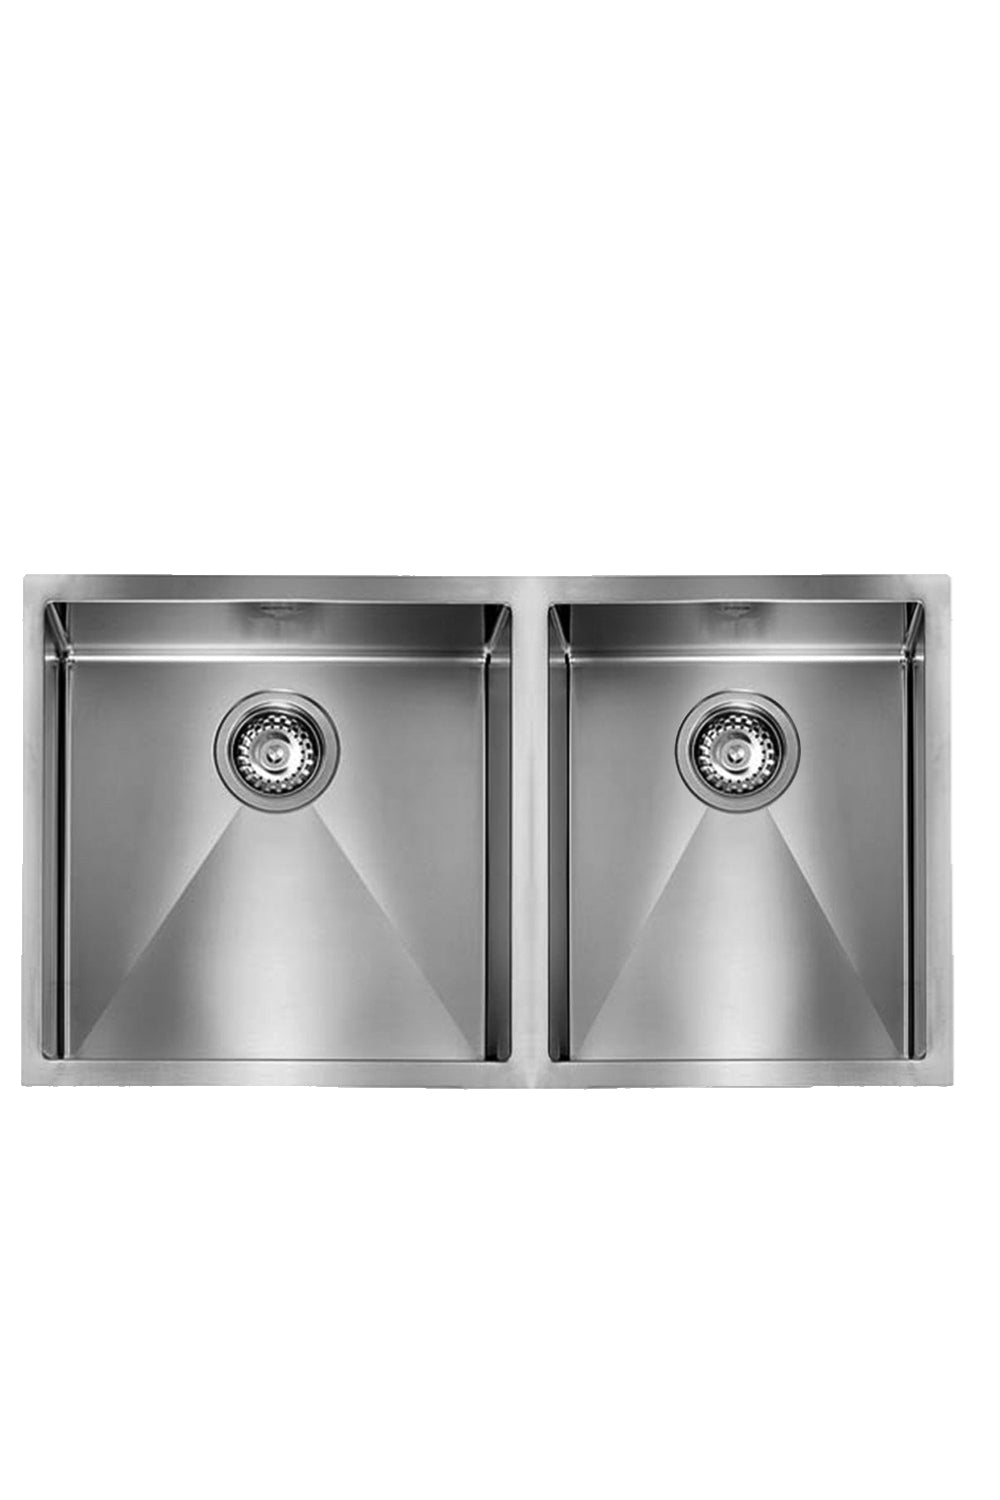 LUISINA 450+300mm R10-Corner Square Stainless Steel Double Sink 意大利製造小圓角不銹鋼雙星盆 | Made in Italy |